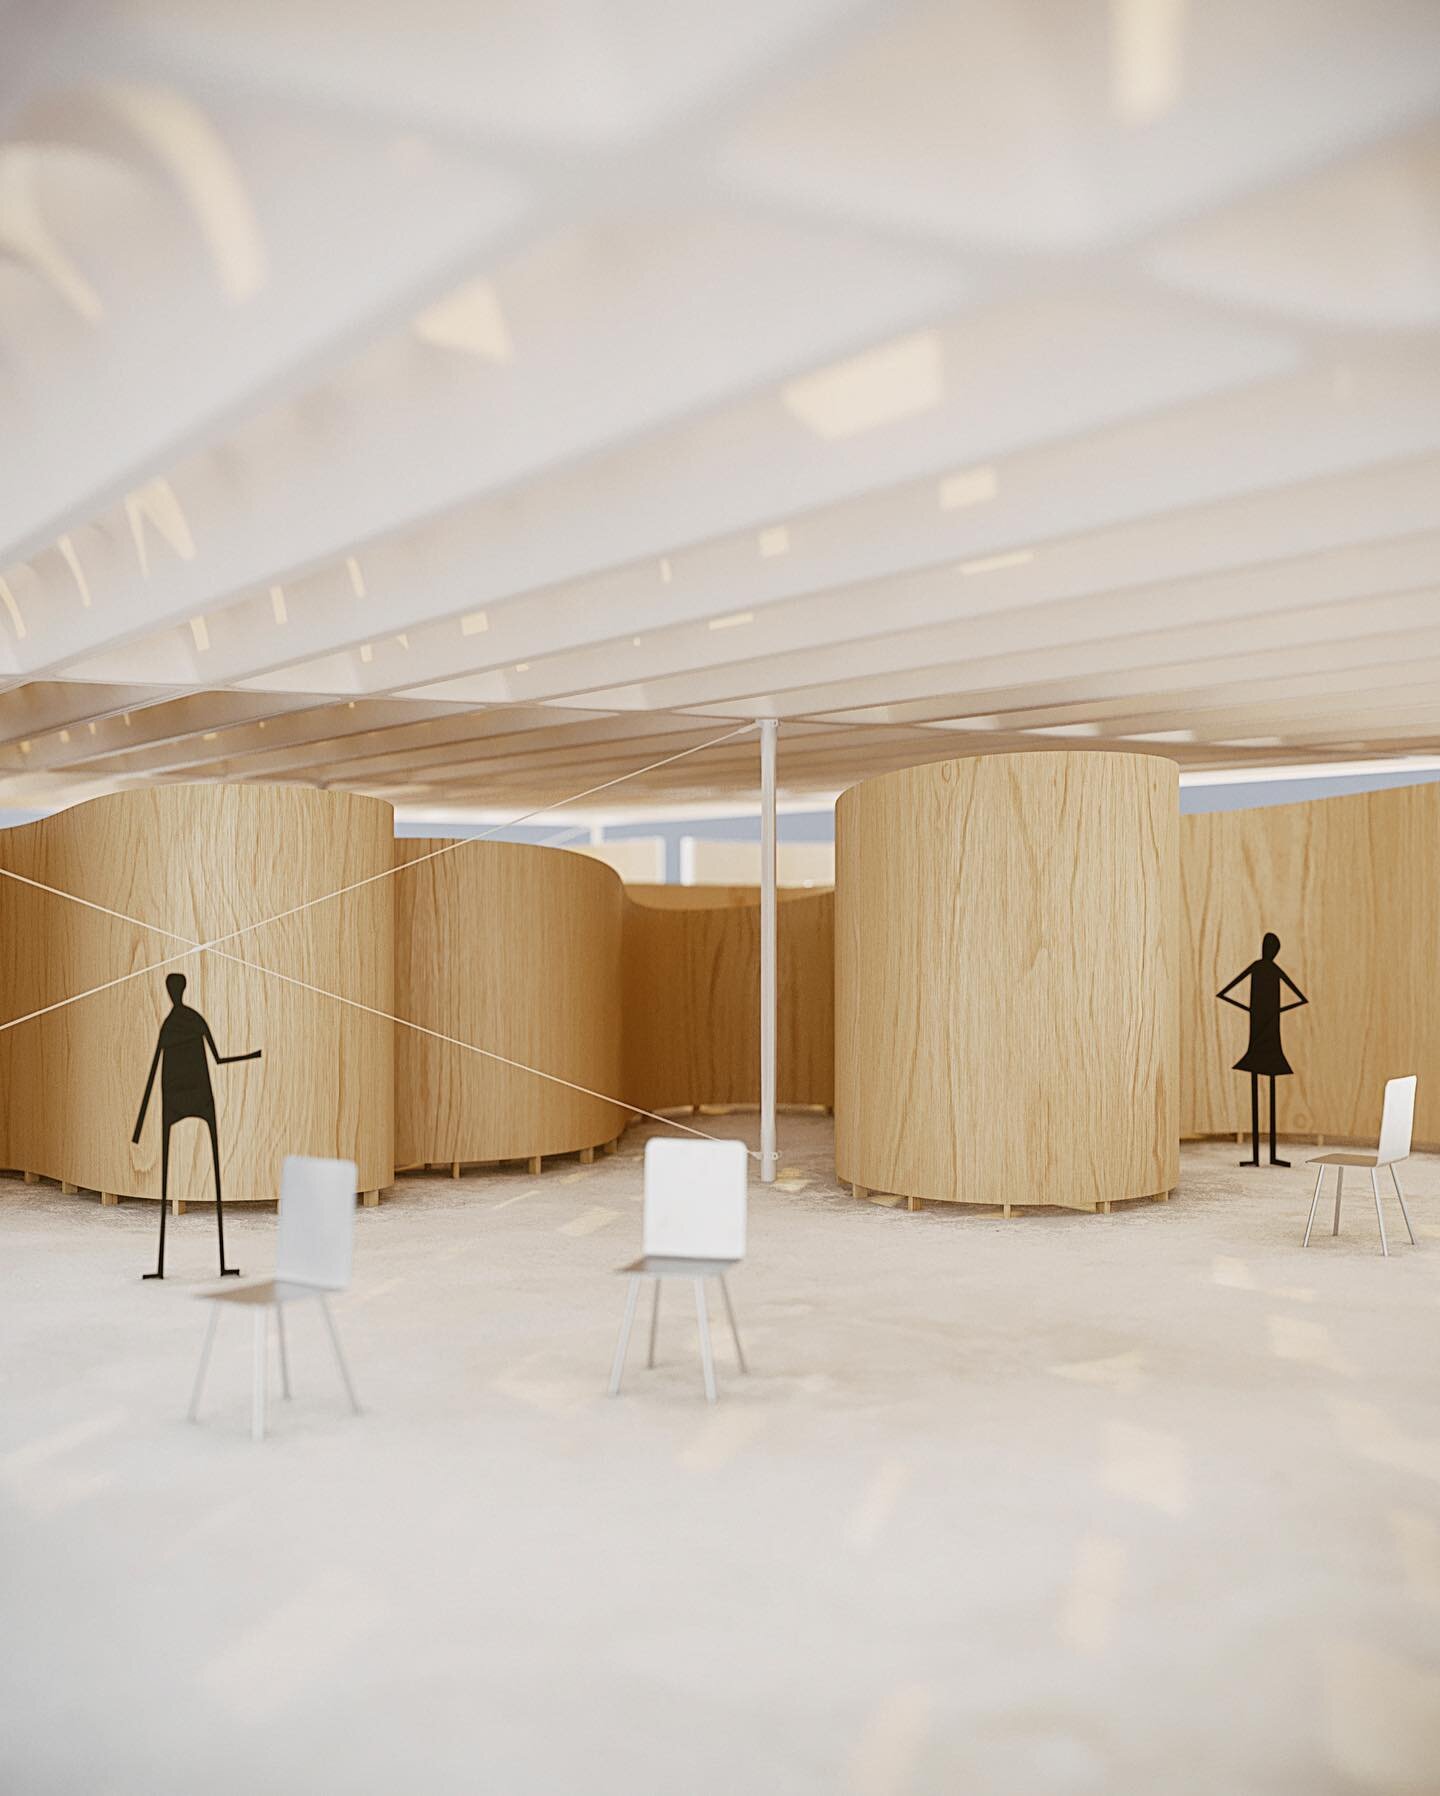 Curved plywood partition walls act as an example installation beneath the #NashvilleAllPurposePavilion #NApP ⁣
.⁣
.⁣
.⁣
.⁣
.⁣
#architect #architecture #architecturelovers #architecturephotography #birchplywood #decor #design #details #detailshot #det